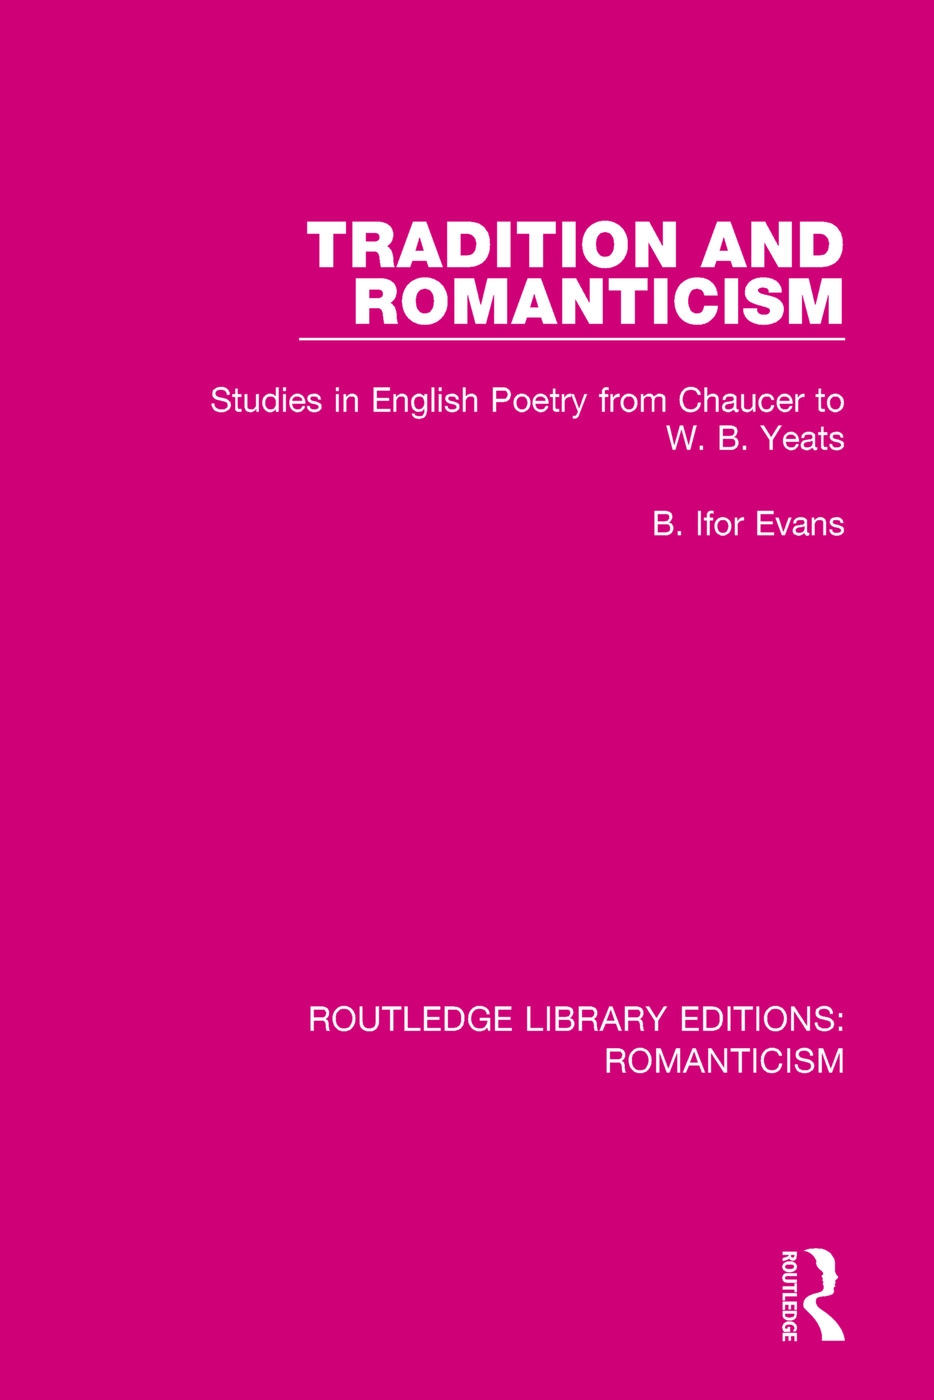 Tradition and Romanticism: Studies in English Poetry from Chaucer to W. B. Yeats